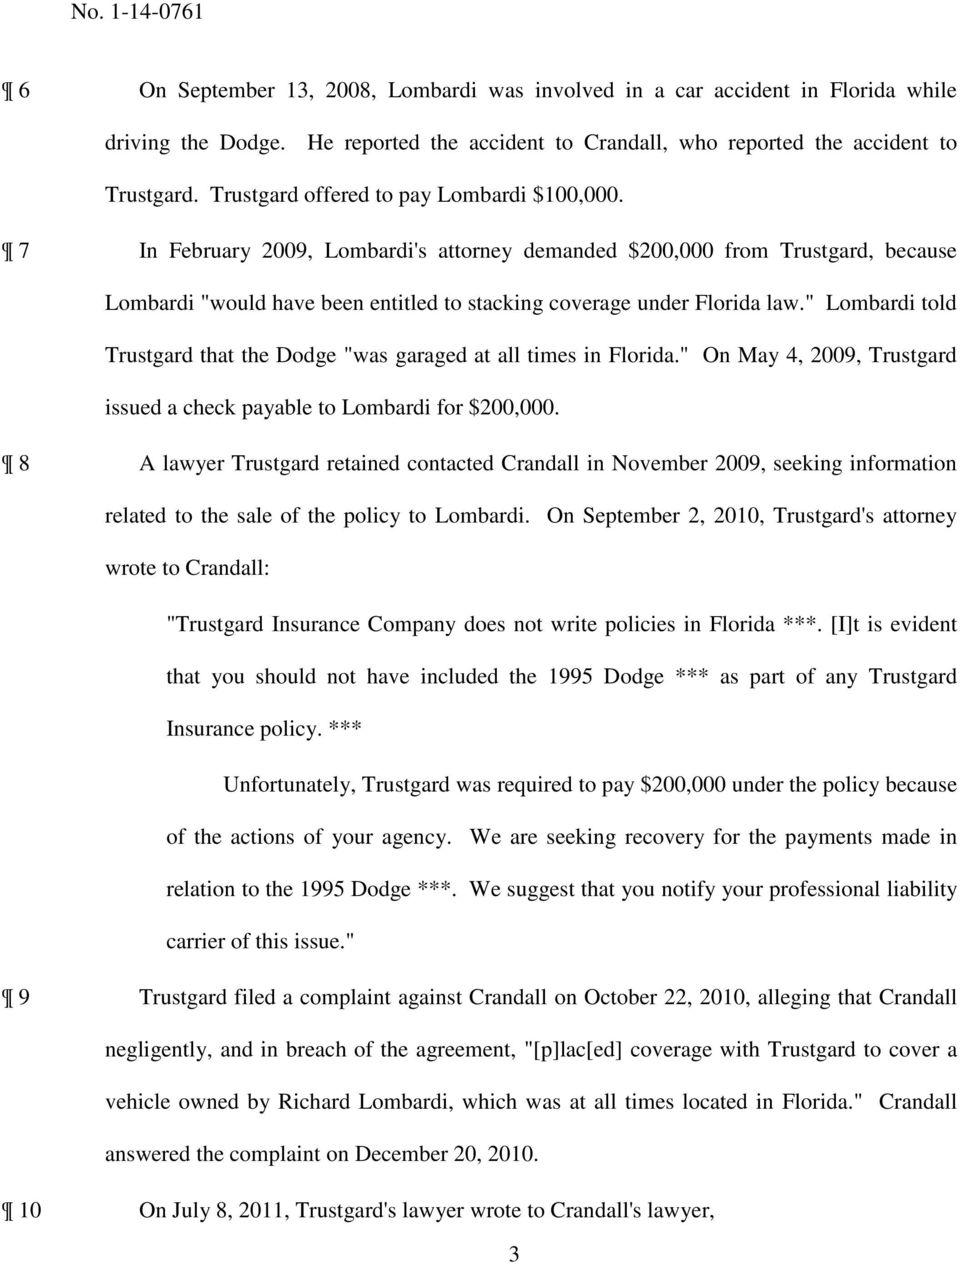 " Lombardi told Trustgard that the Dodge "was garaged at all times in Florida." On May 4, 2009, Trustgard issued a check payable to Lombardi for $200,000.